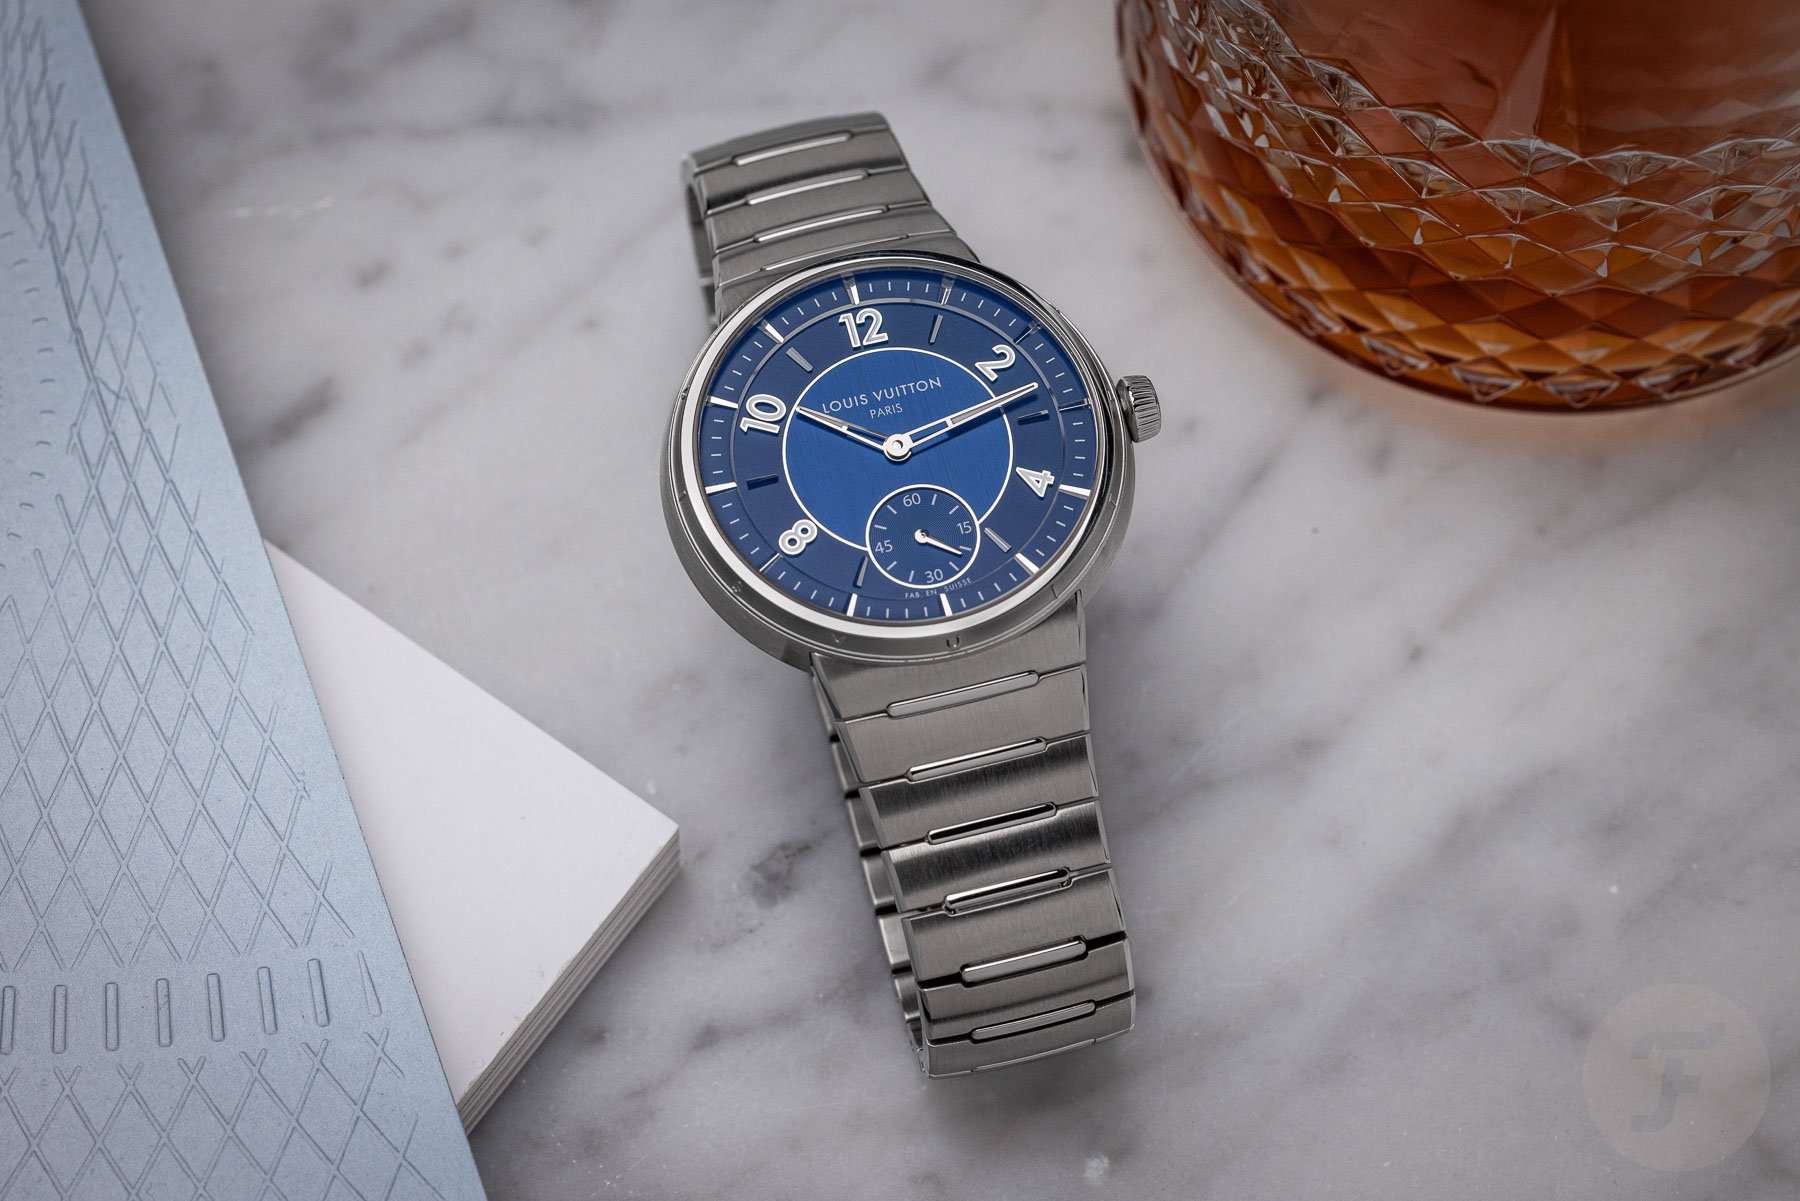 Louis Vuitton] New Tambour with steel bracelet : r/Watches